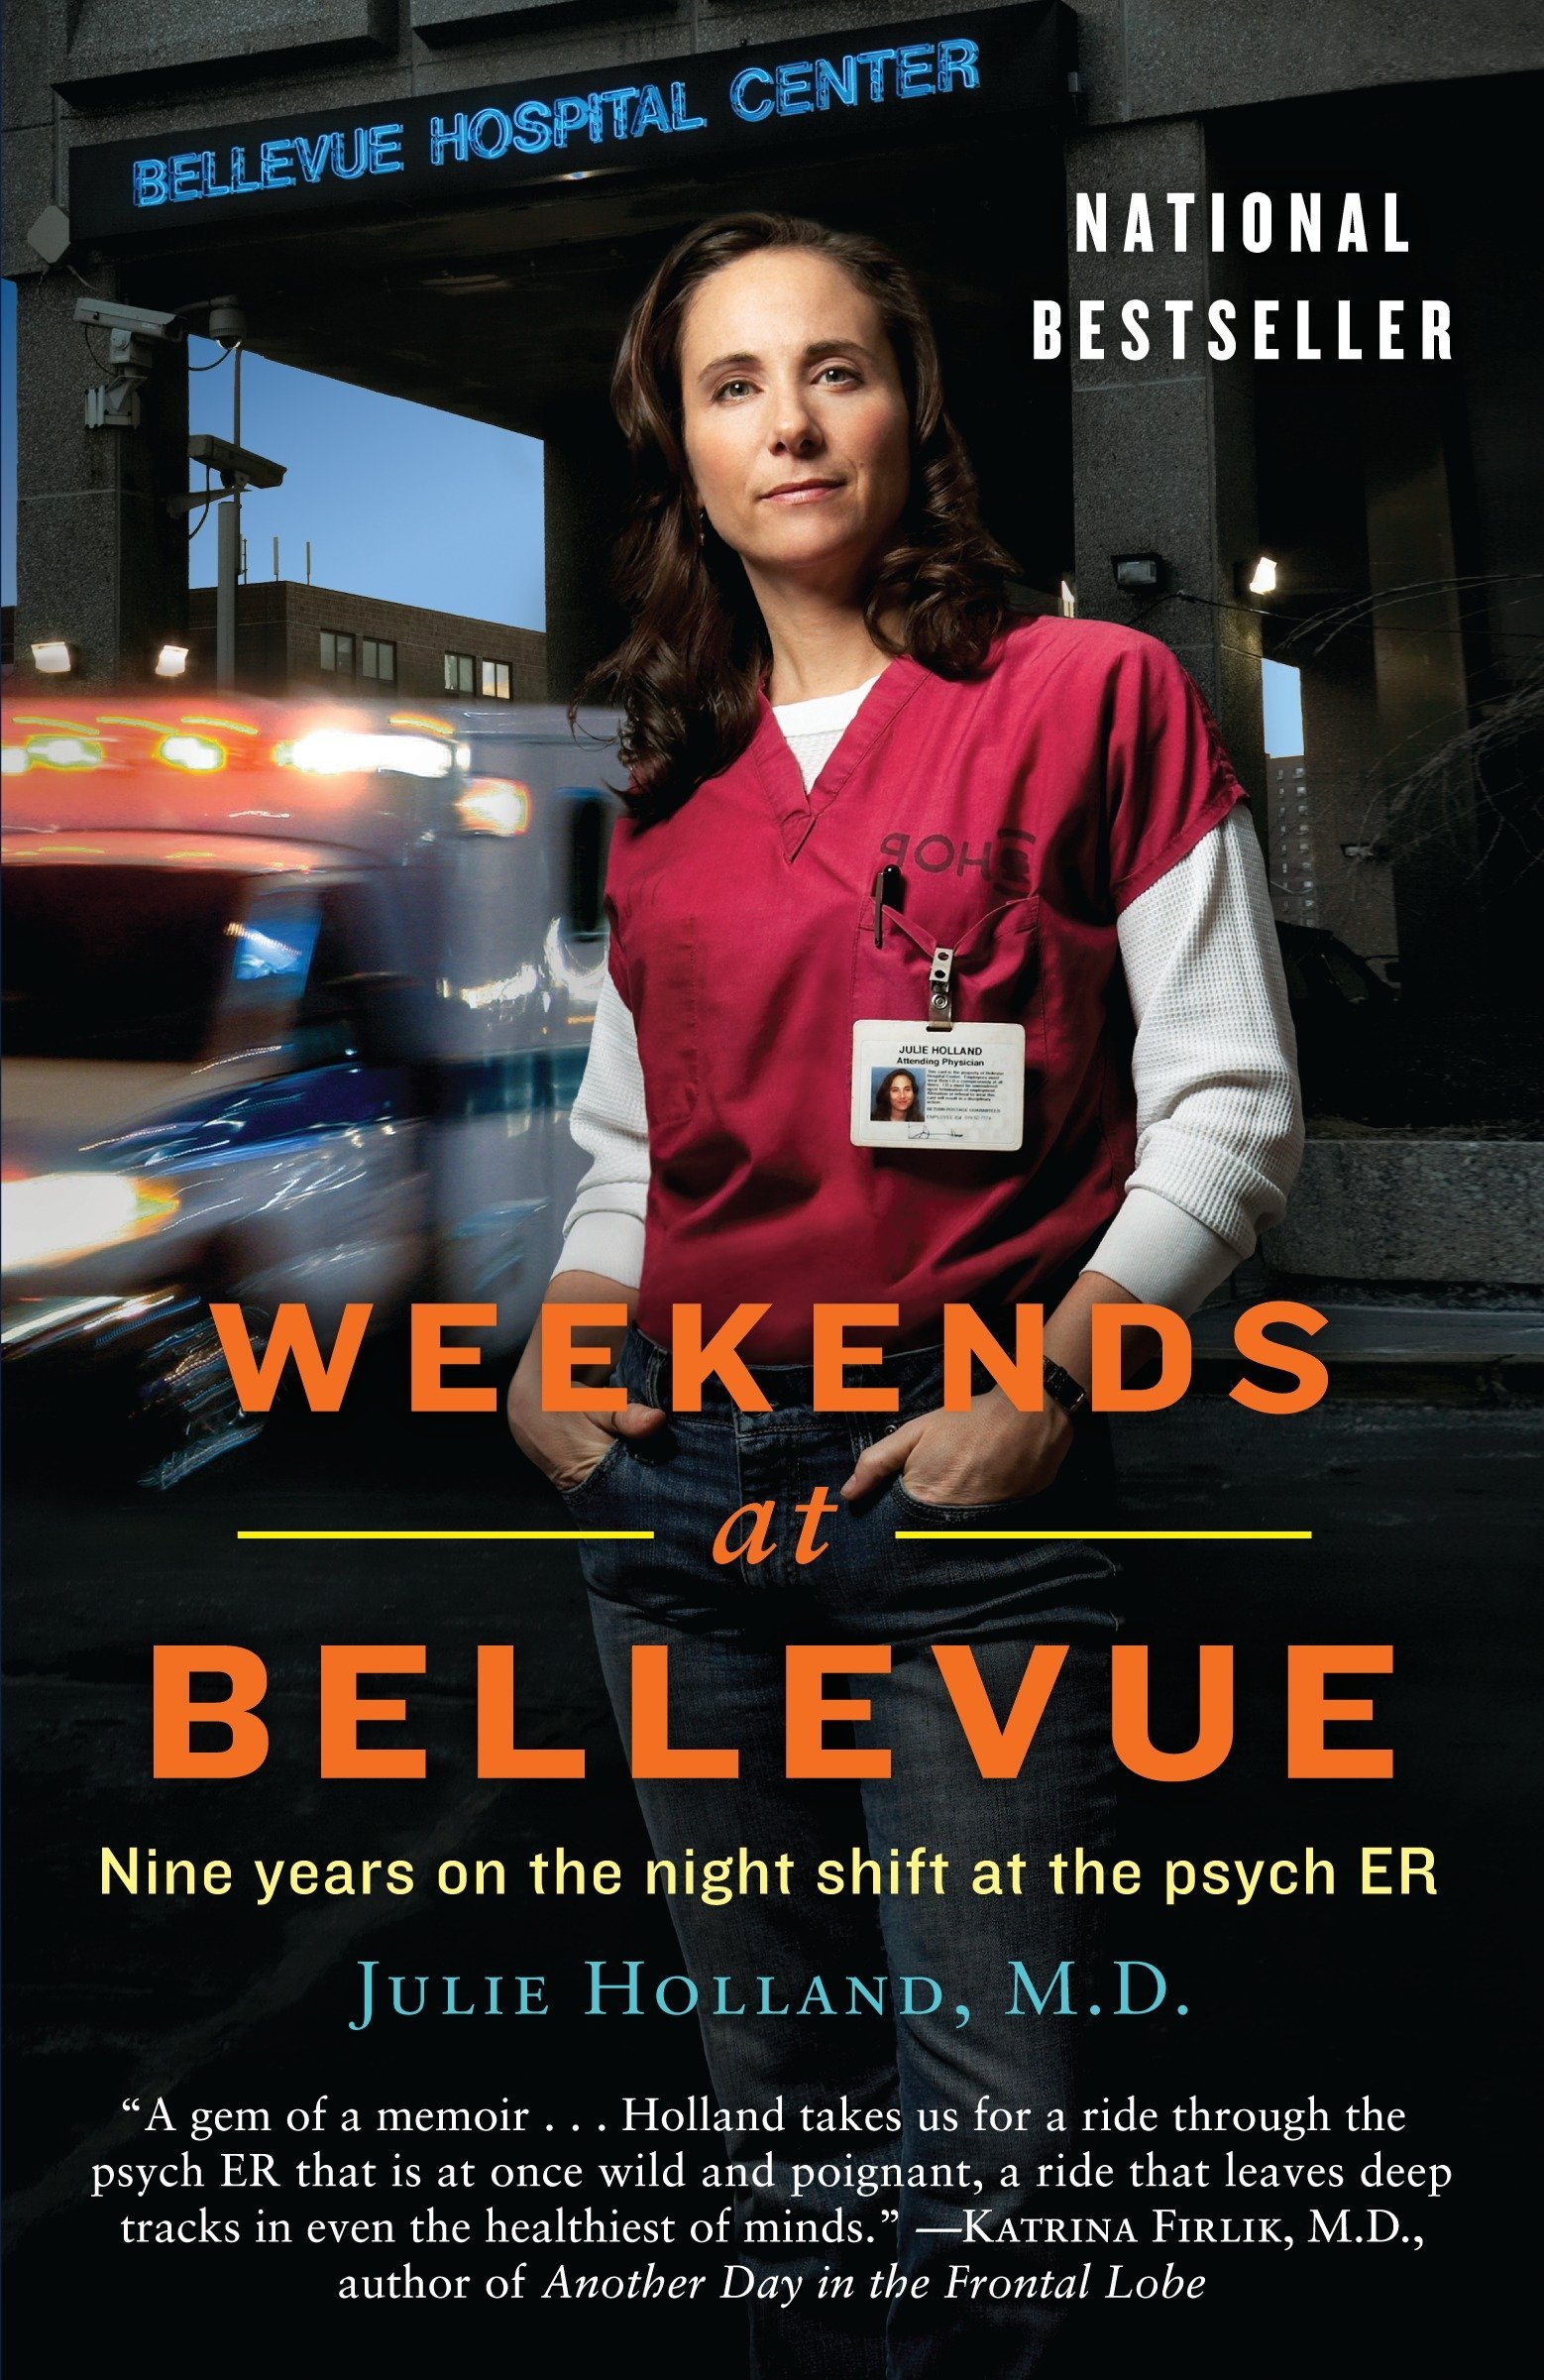 Weekends at Bellevue: Nine Years on the Night Shift at the Psych E.R.